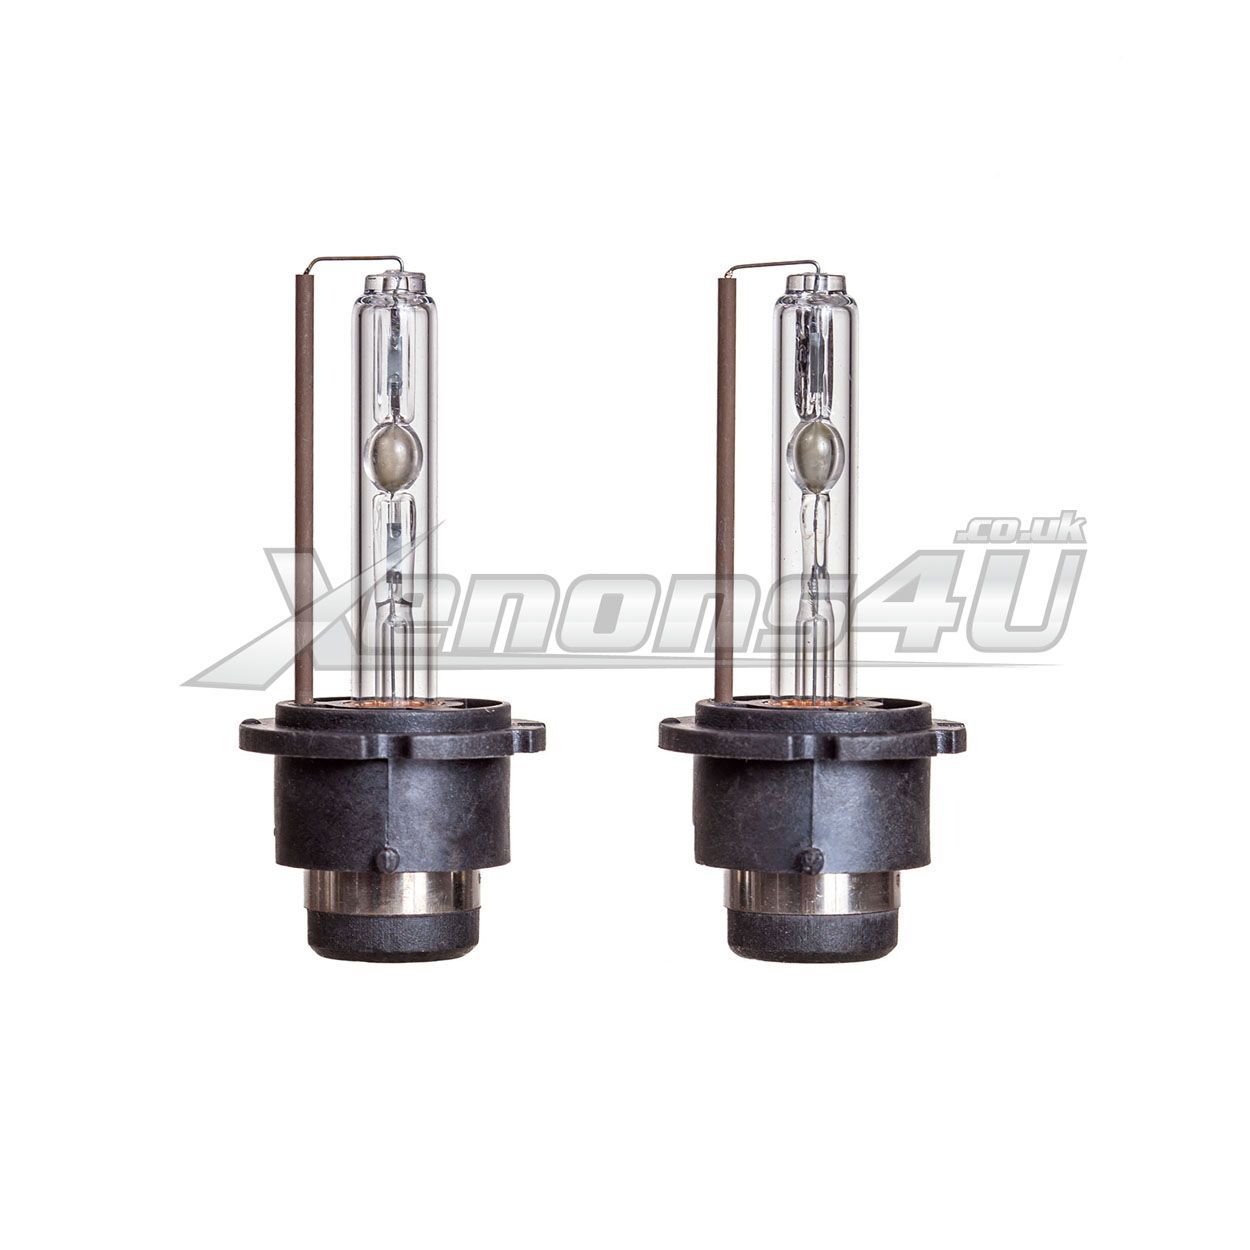 D1S 35w Replacement OEM Xenon HID Bulbs (Pair) — Xenons Online